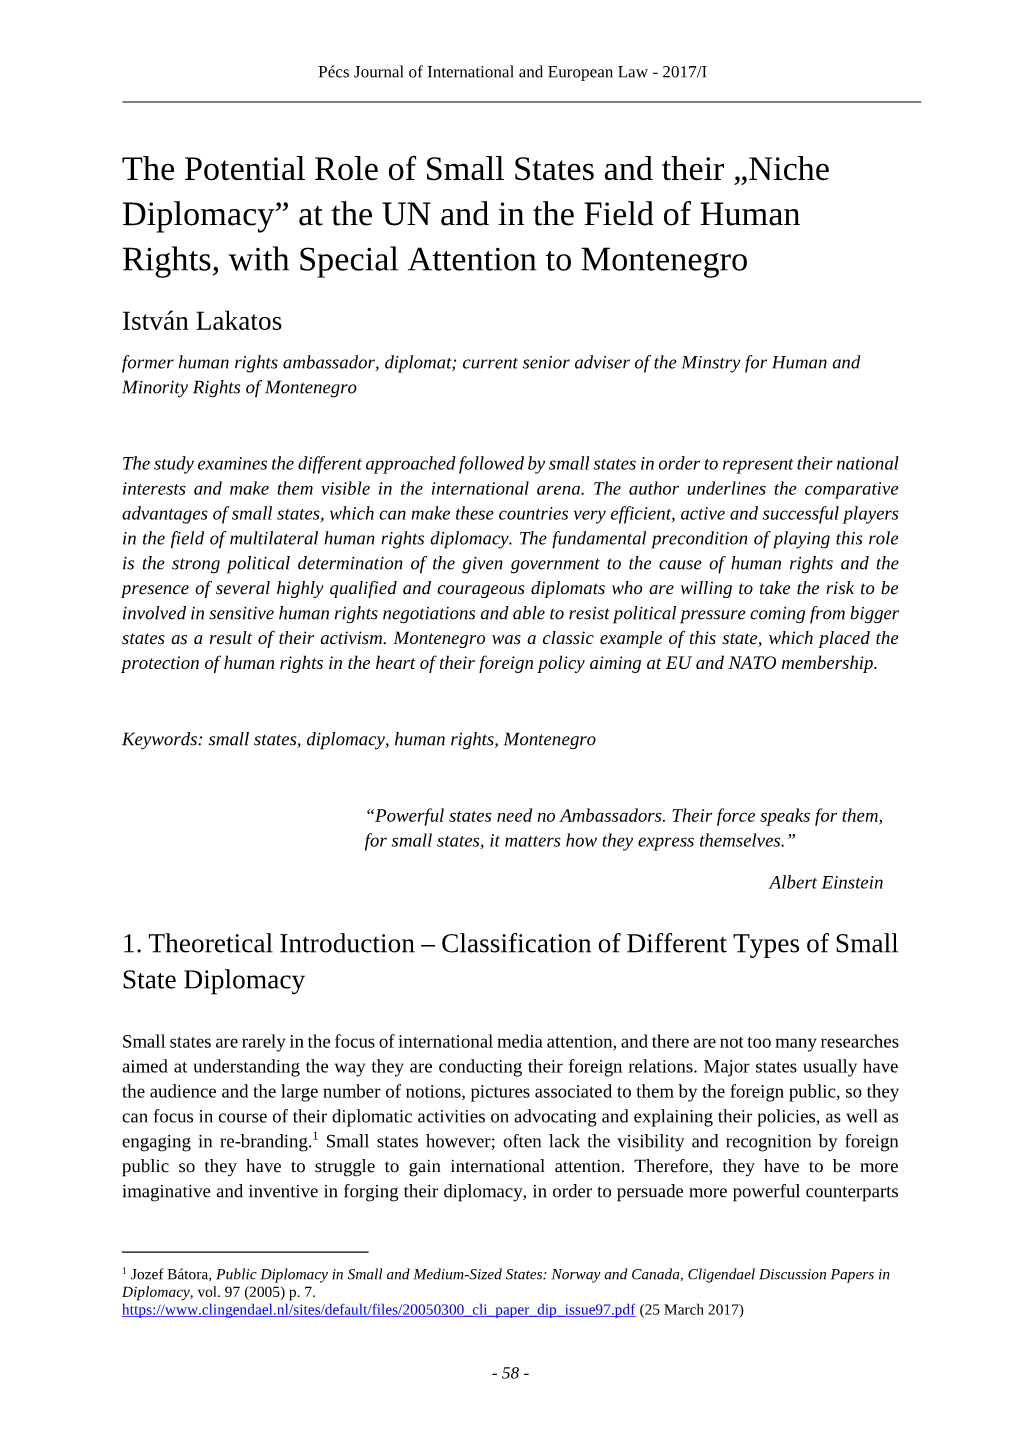 The Potential Role of Small States and Their „Niche Diplomacy” at the UN and in the Field of Human Rights, with Special Attention to Montenegro